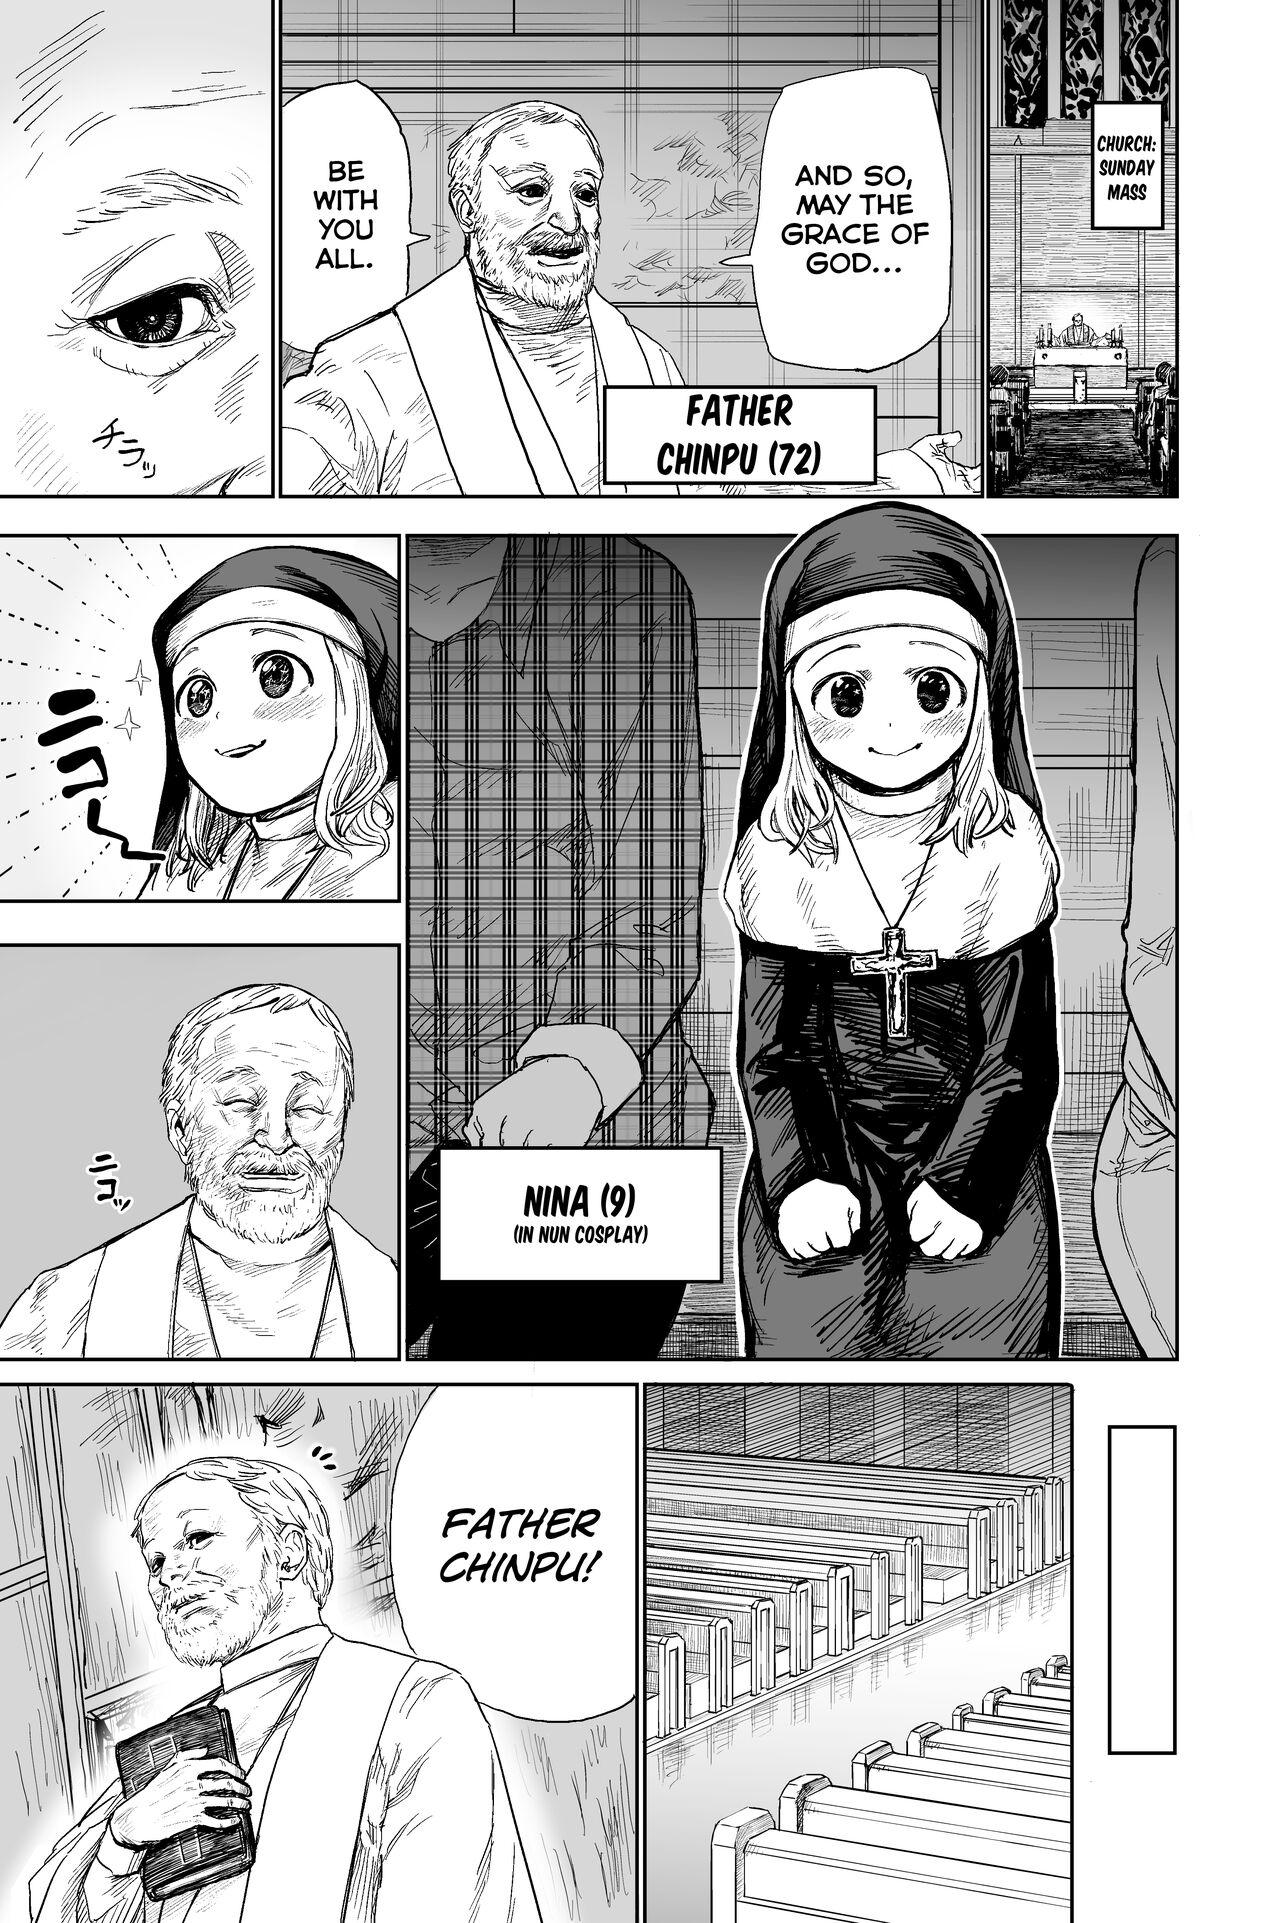 Stroking Loli Sister to Sex suru Isshuukan | A Week of Sex With a Loli Nun Reversecowgirl - Page 2